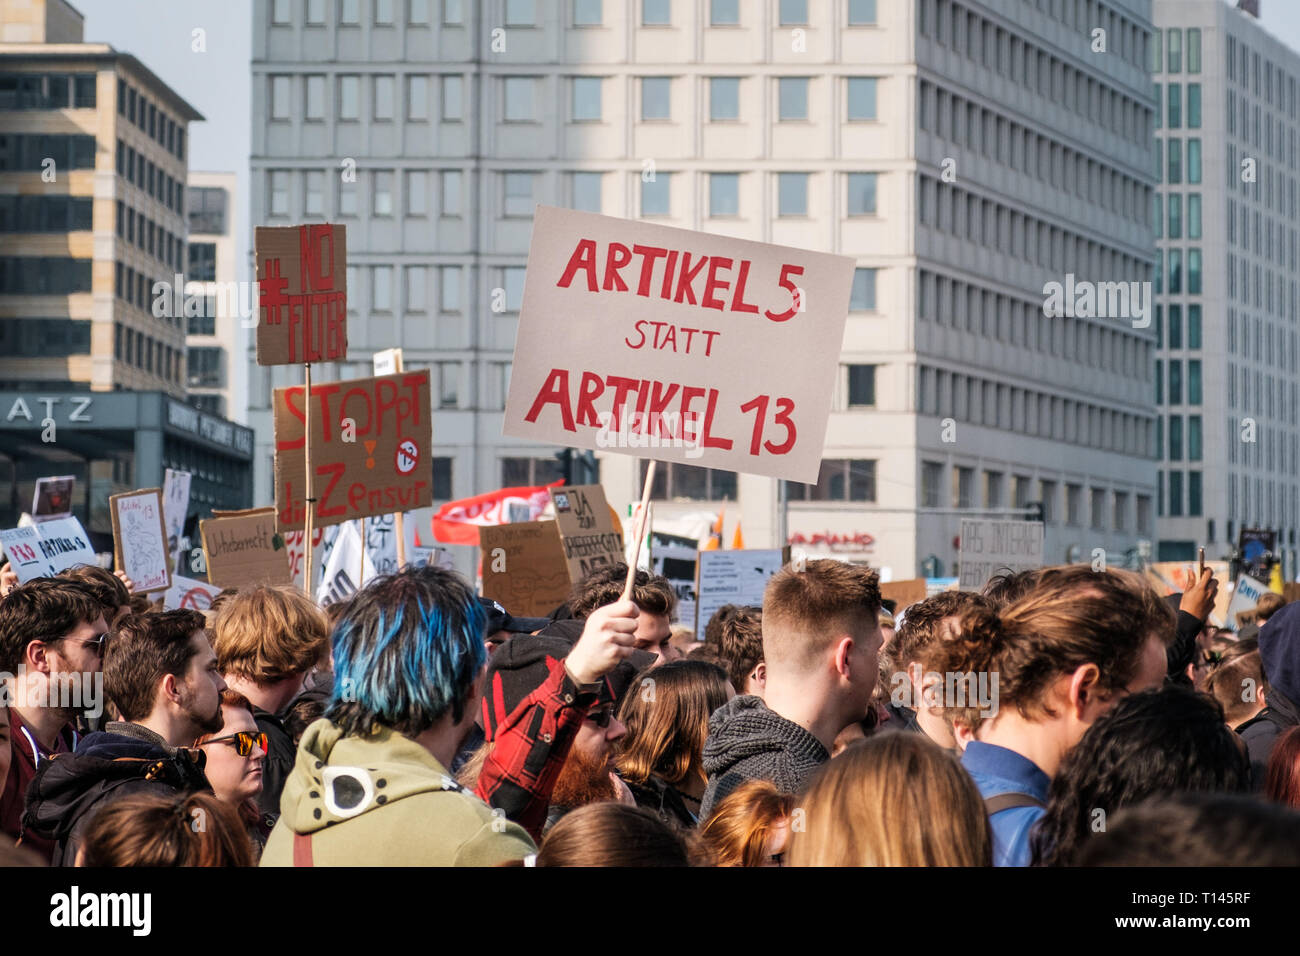 Berlin, Germany - march 23, 2019: Demonstration against EU copyright reform  / article 11 and article 13  in Berlin Germany. Stock Photo